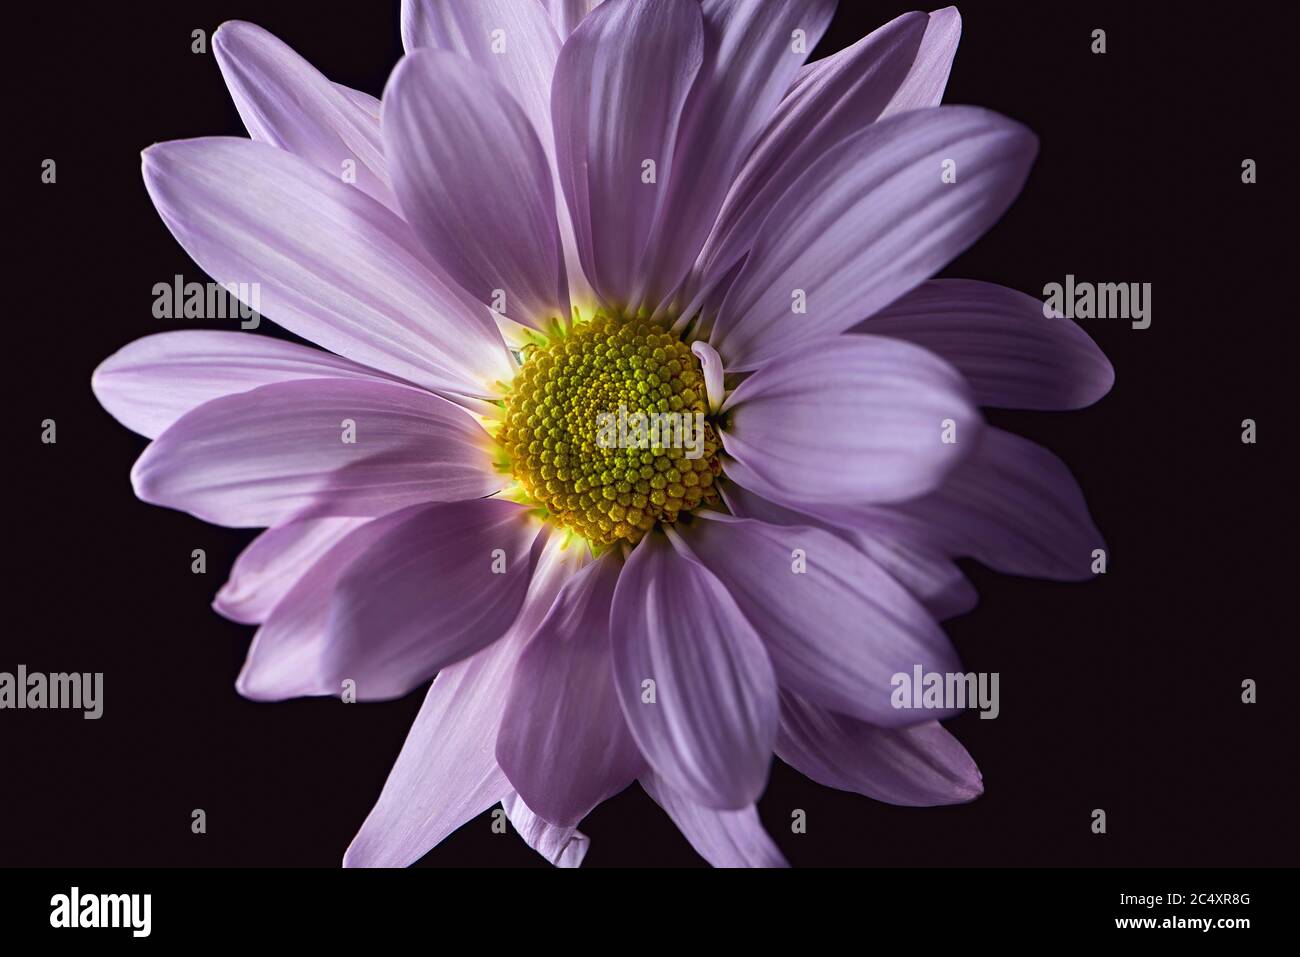 Fresh and vibrant pink daisy flower on a solid black background Stock Photo